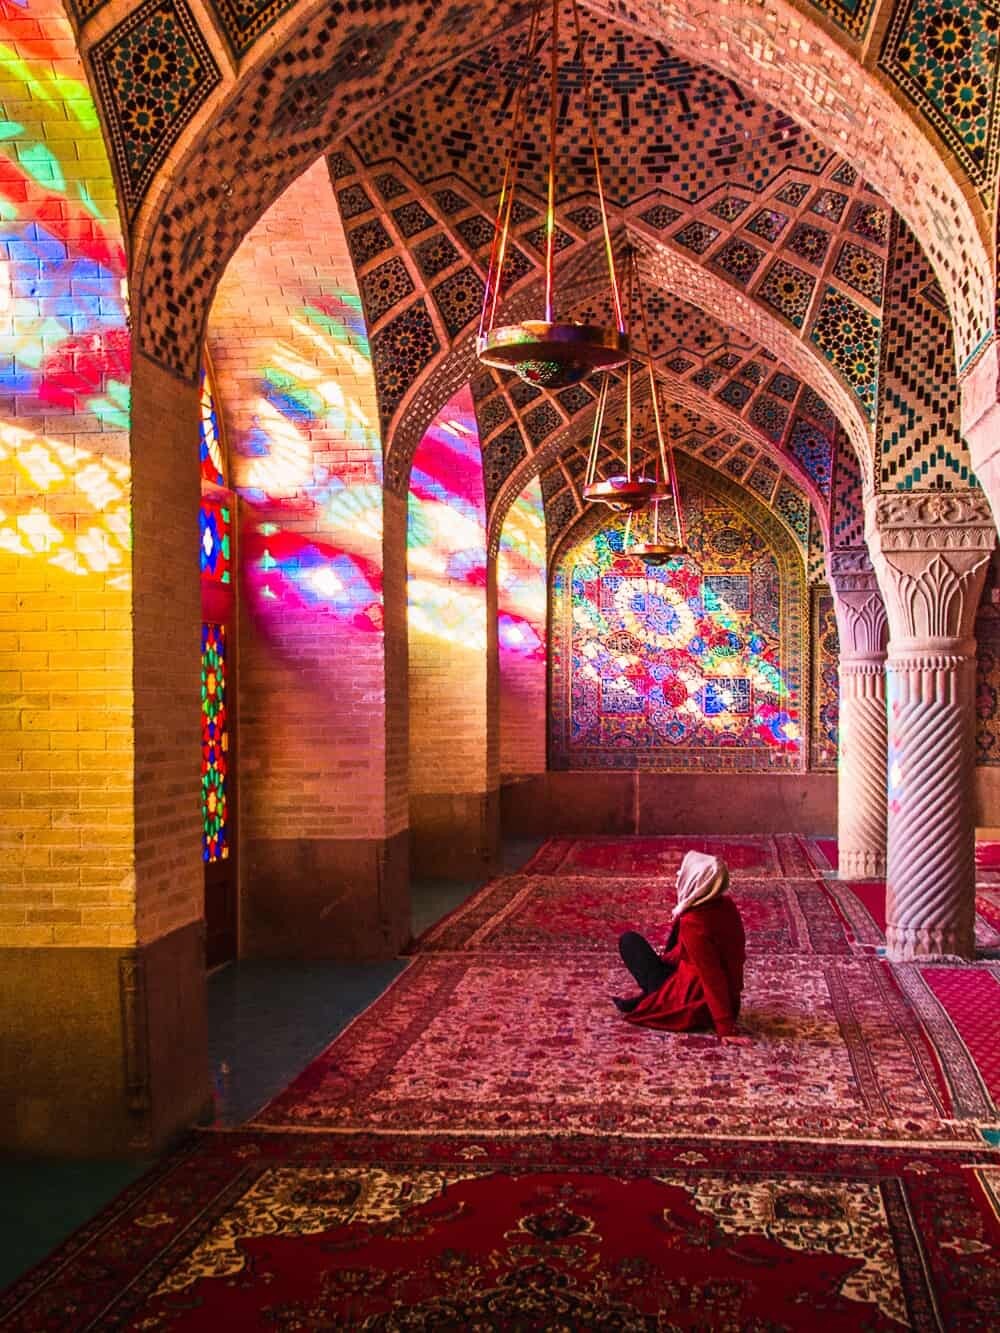 Iran travel guide and photography locations